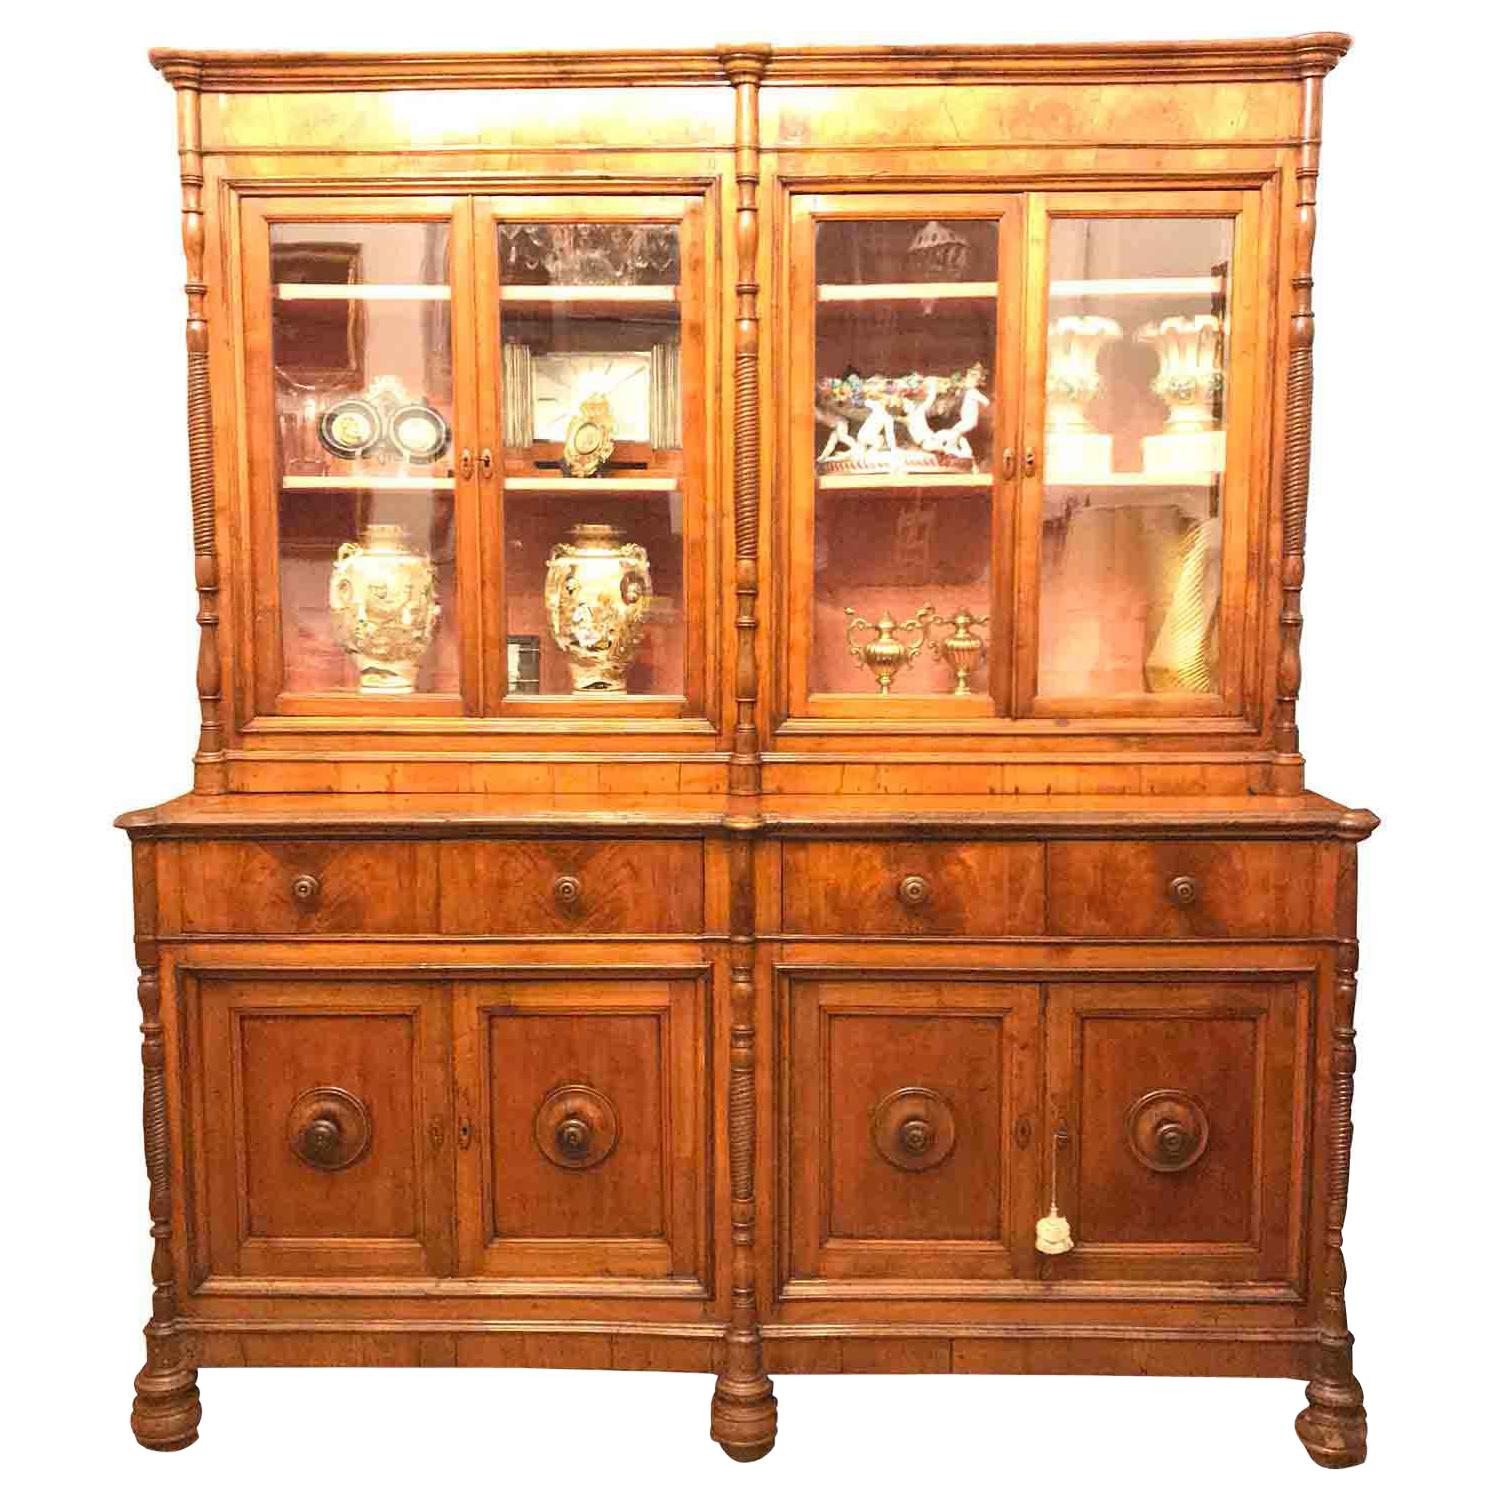 Mid-19th Century Italian Four Door Bookcase Two-Part Cherry Sideboard